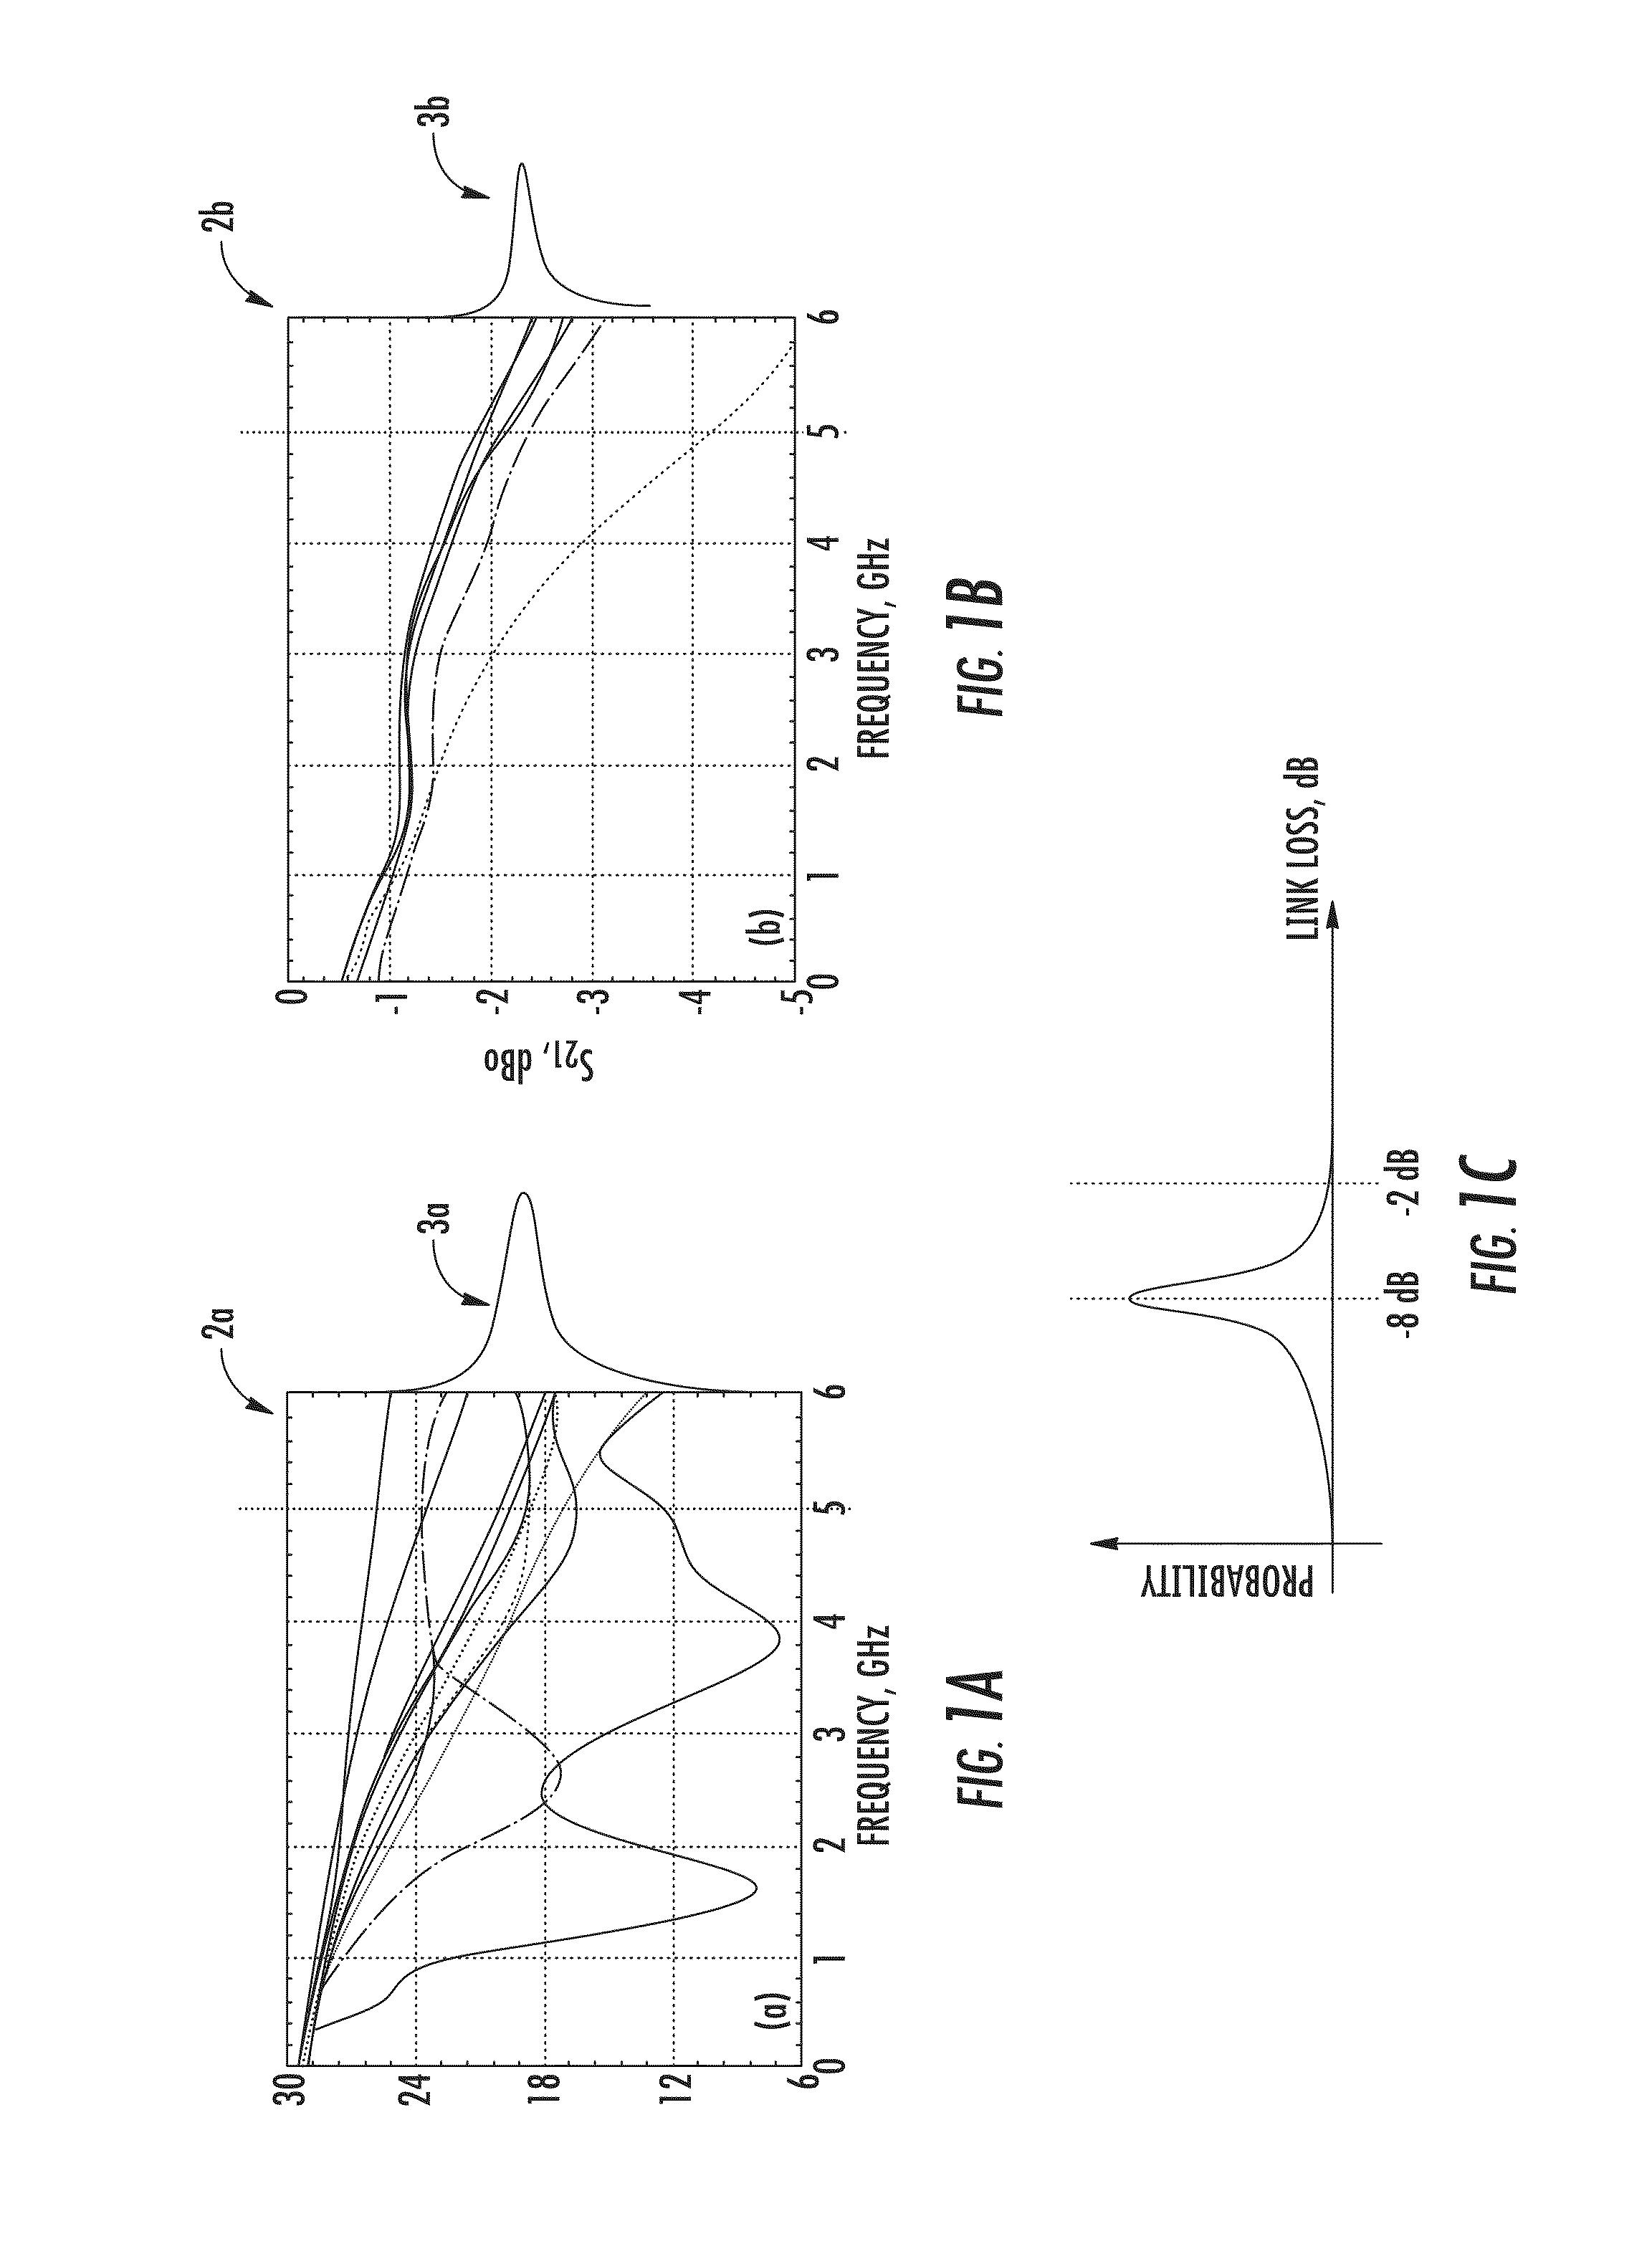 Dynamic cell bonding (DCB) for radio-over-fiber (RoF)-based networks and communication systems and related methods